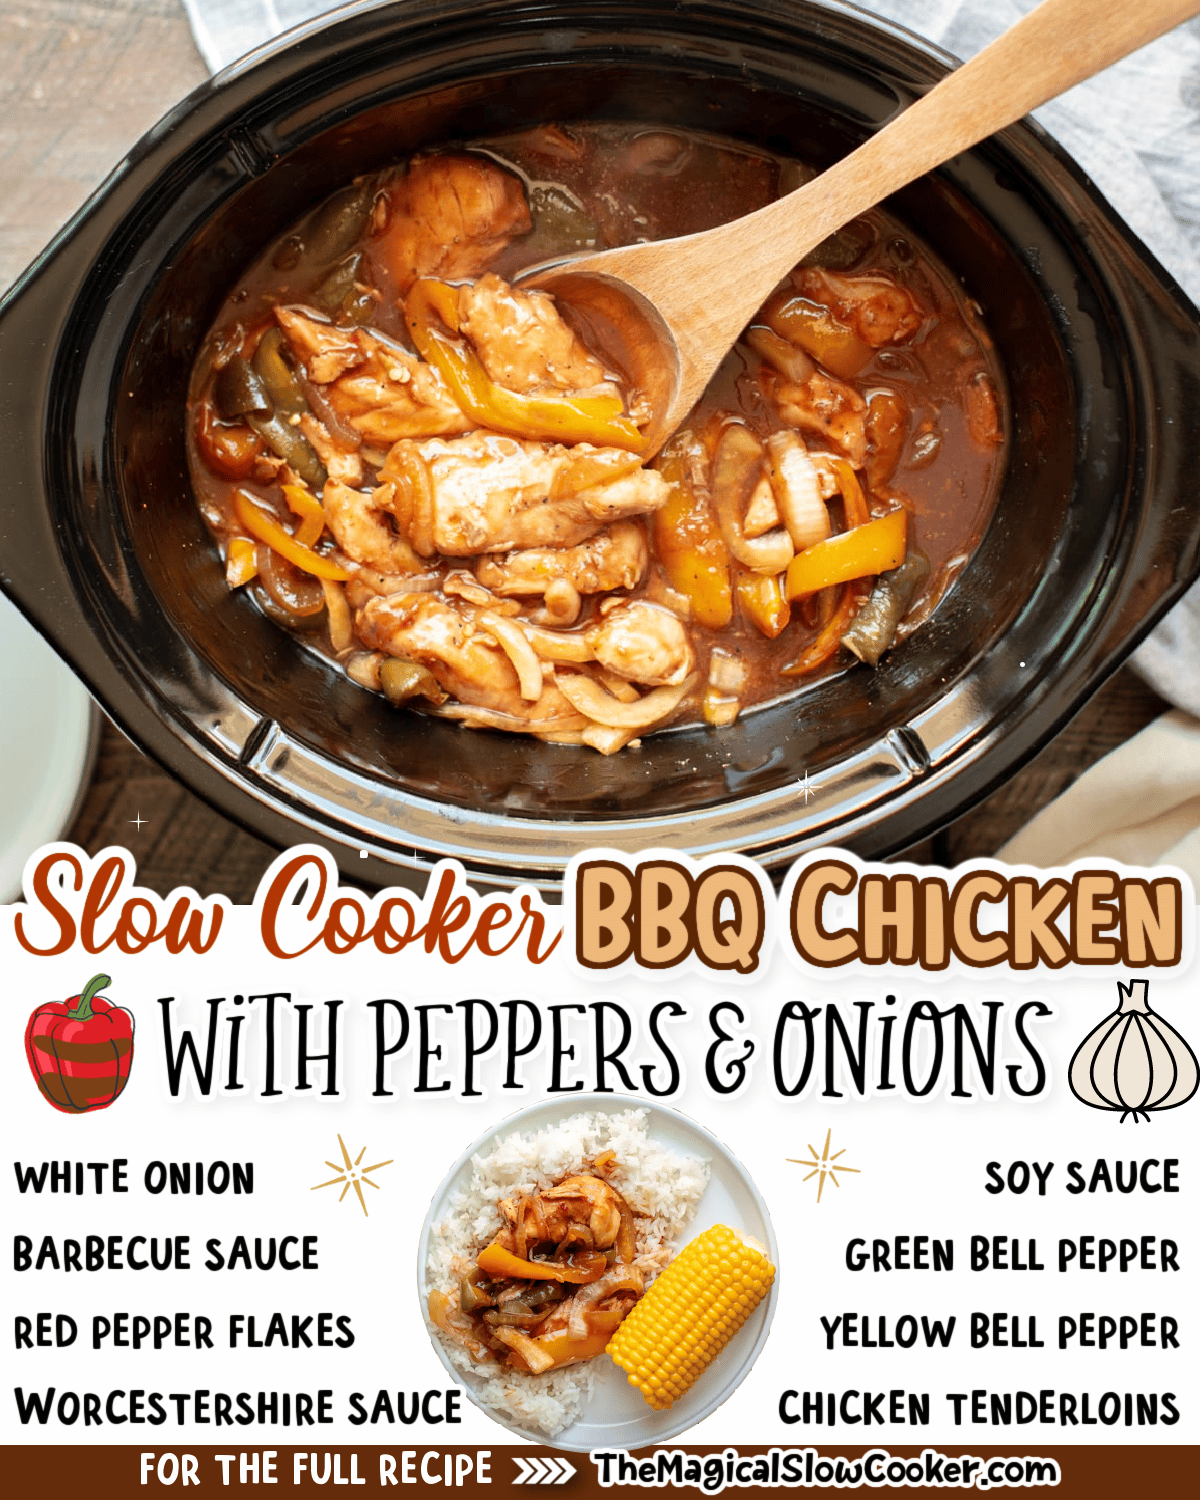 Collage of bbq chicken images with text of what the ingredients are for facebook or pinterest.